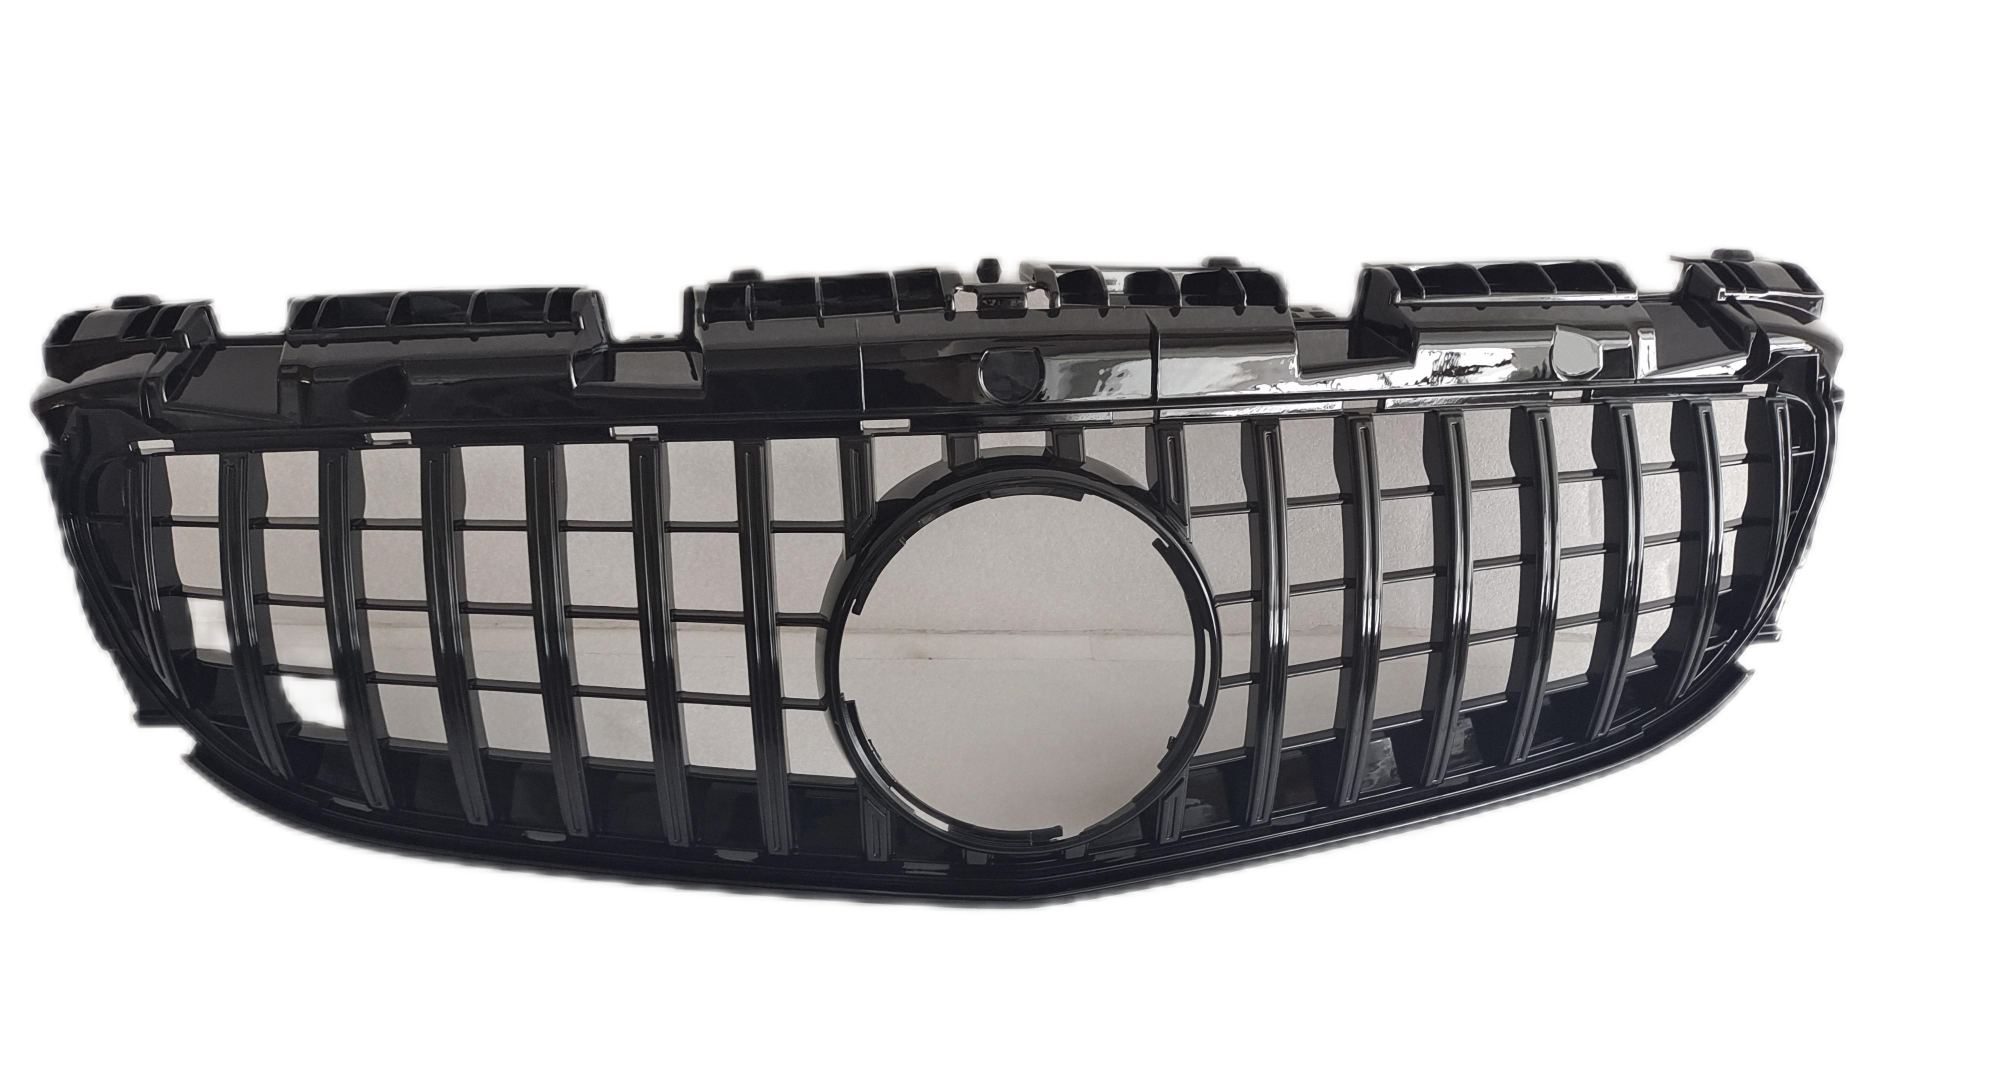  SLC W197 GTR SIL/GB STYLE GRILLE For Mercedes Benz